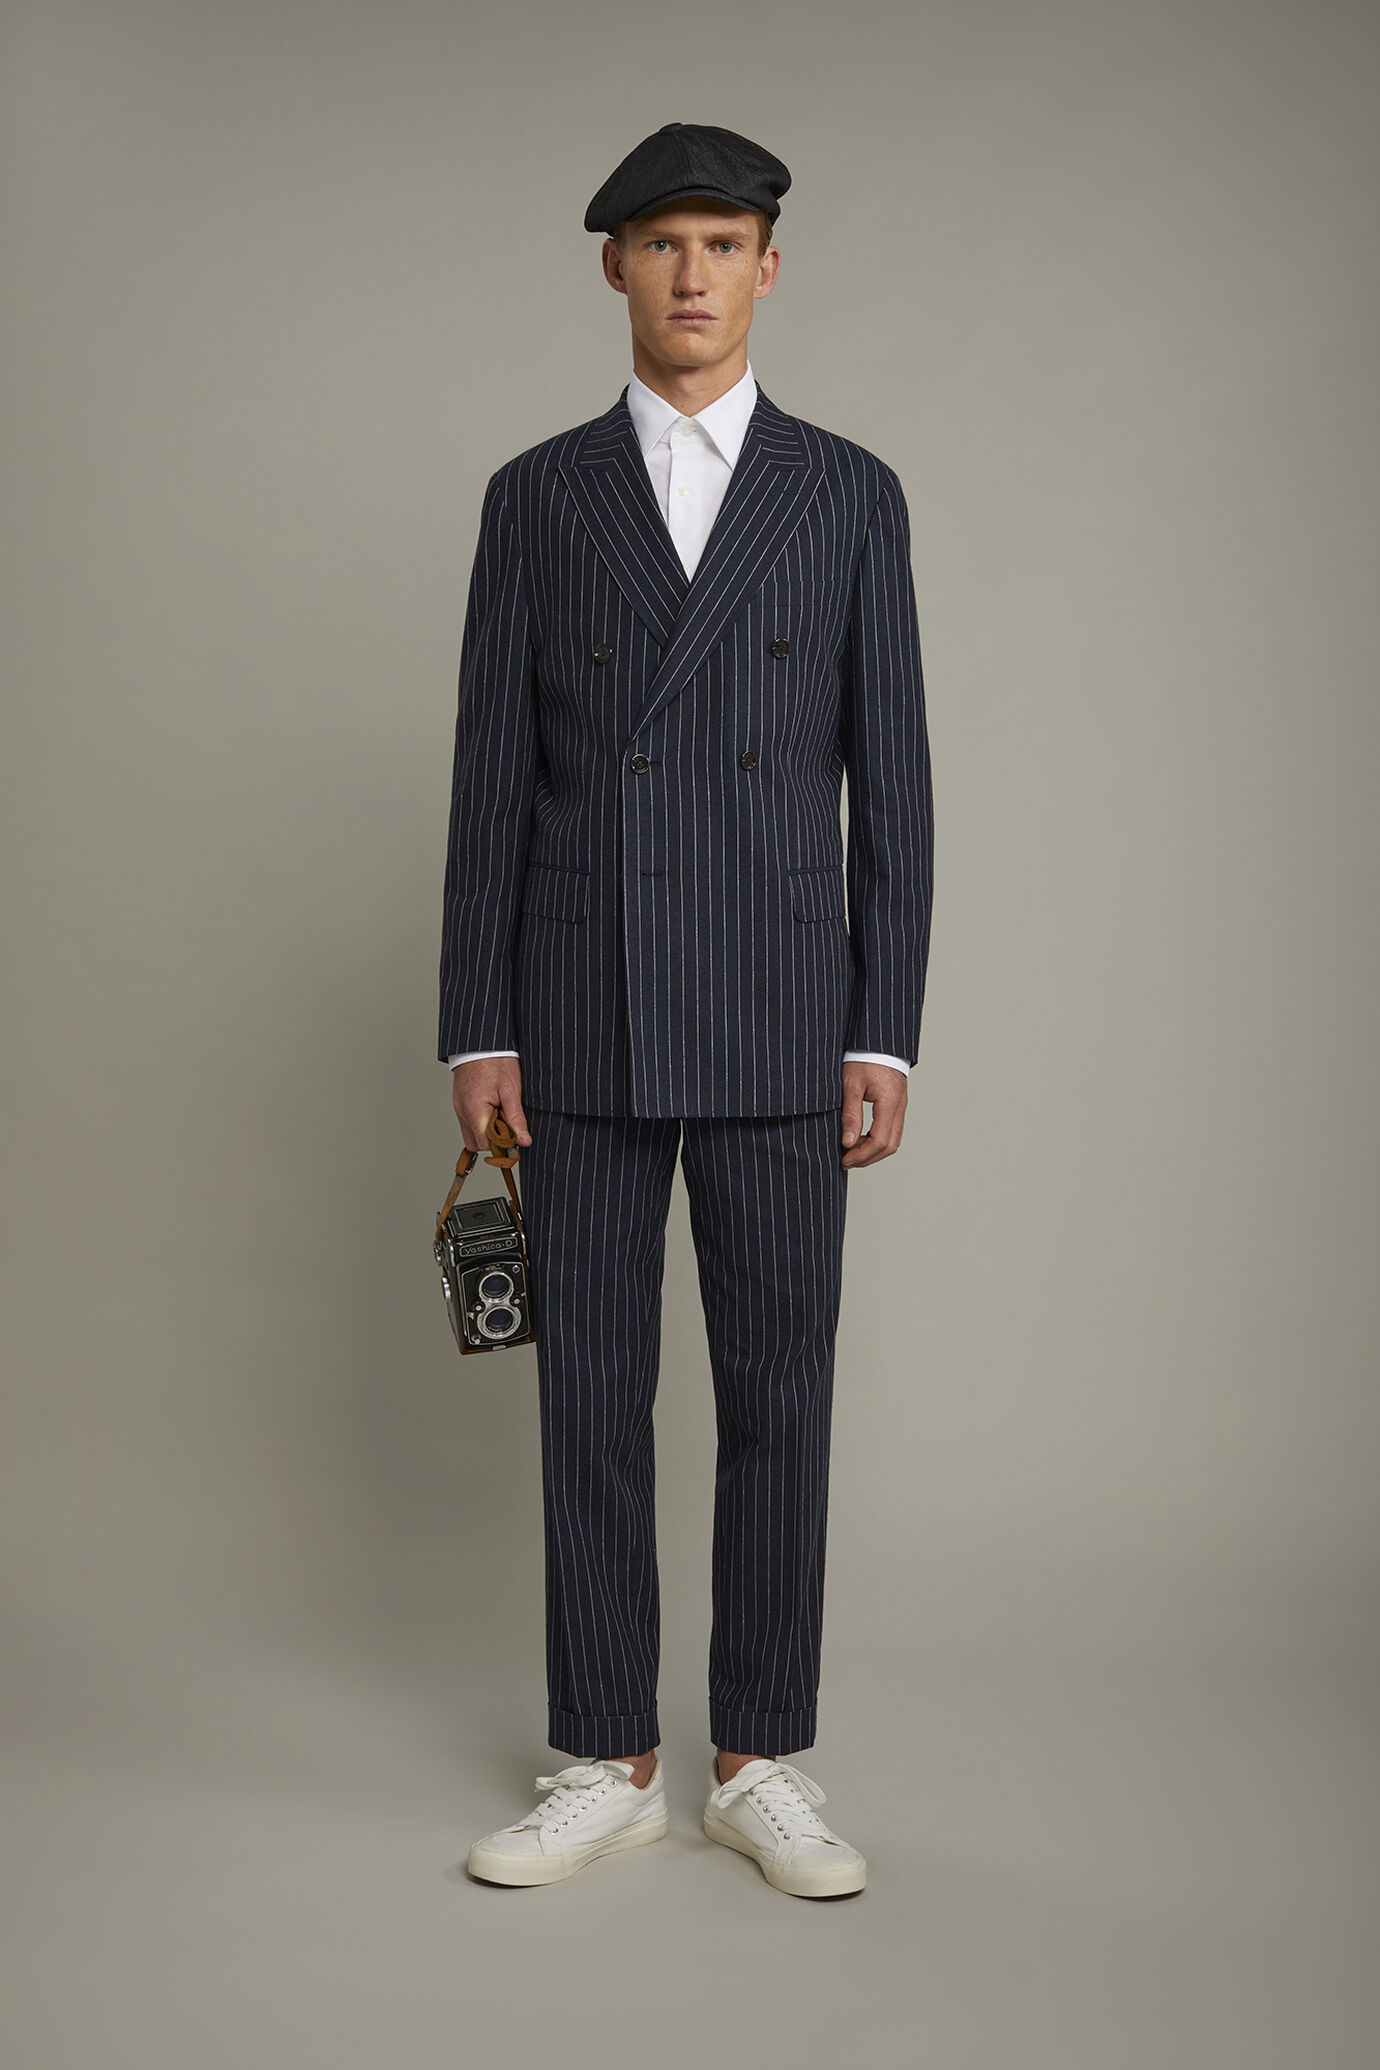 Men's unlined double-breasted blazer with spread collar and flap pockets linen and cotton fabric with regular fit pinstripe design